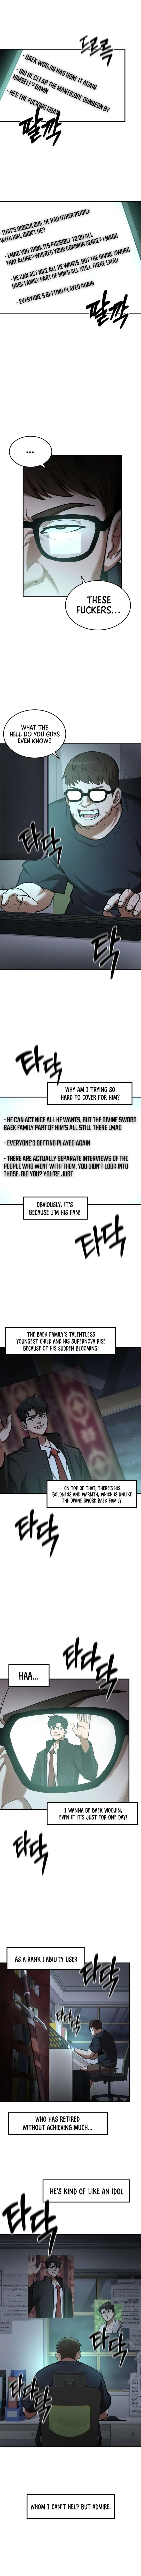 I Became a Renowned Family’s Sword Prodigy Chapter 93 page 2